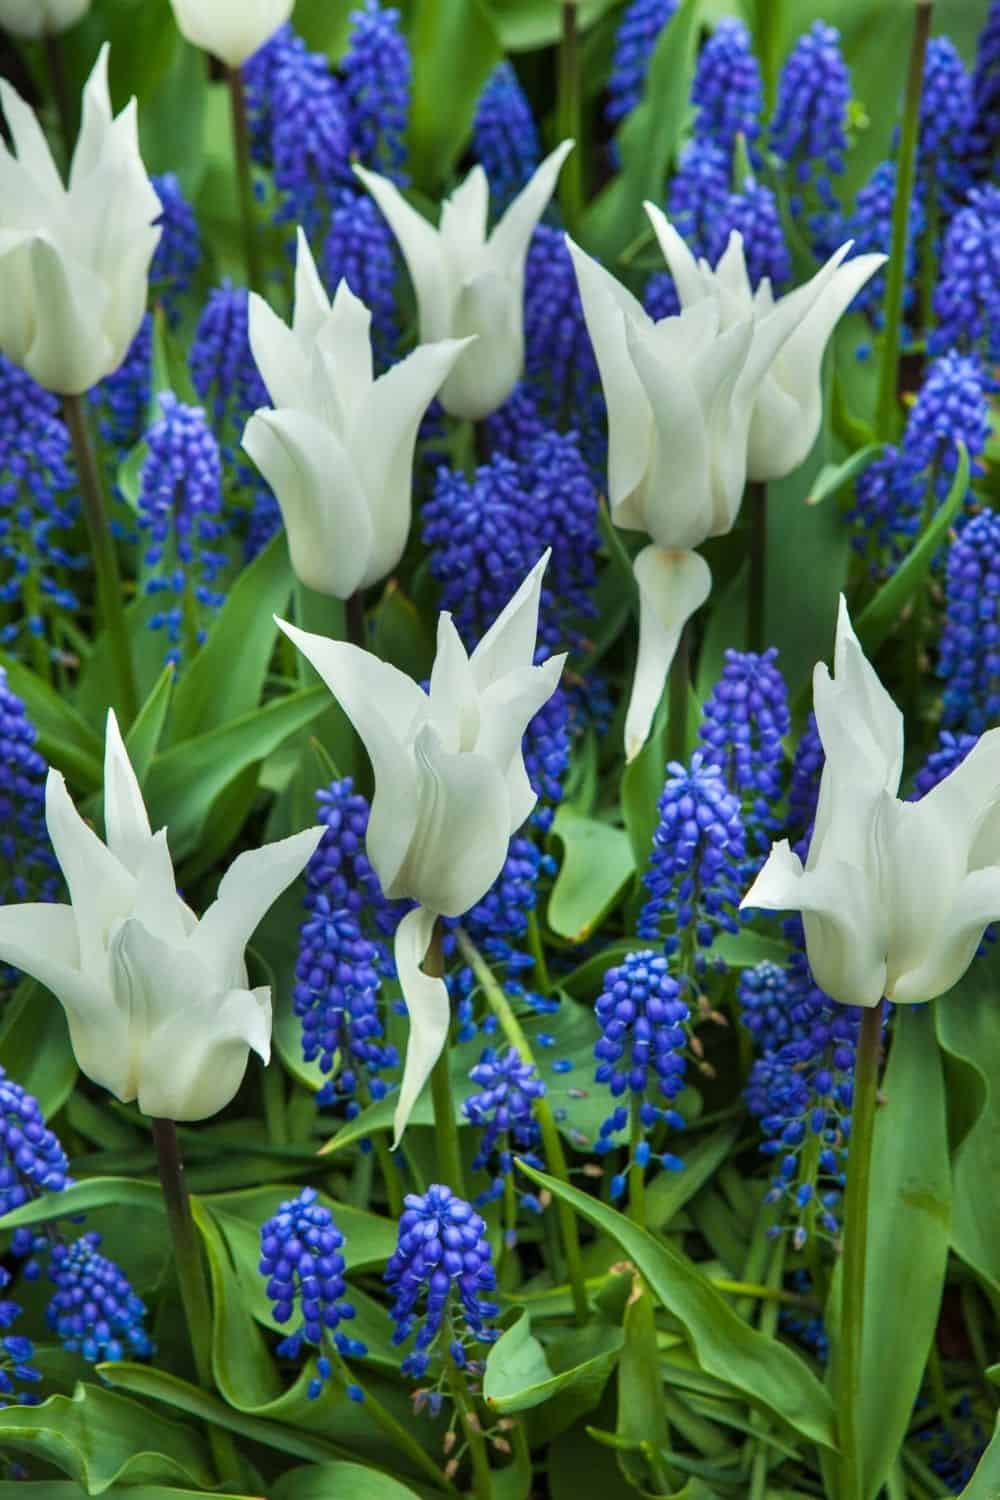 pure white tulips mixed in with blue grape hyacinth flowers